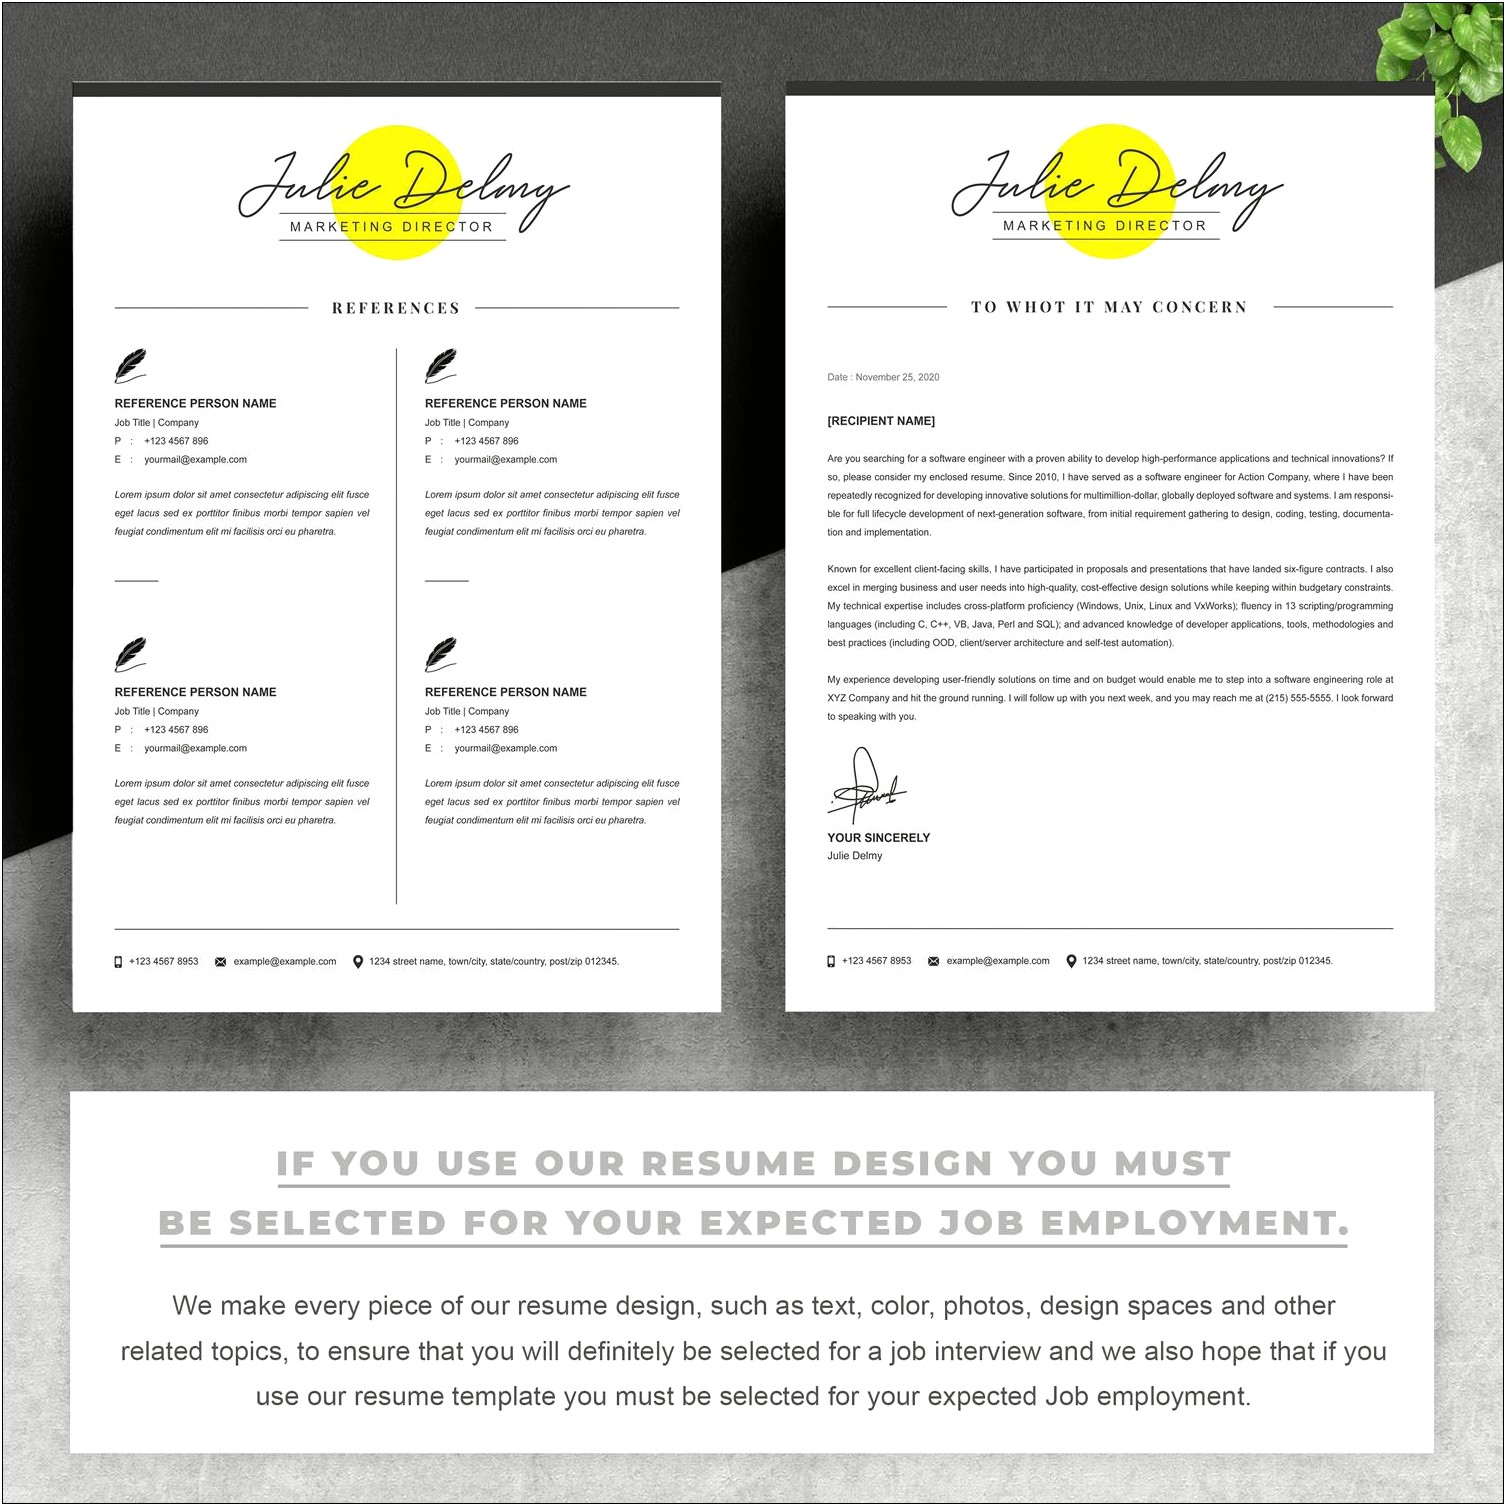 Free Resume Templates For Marketing Director